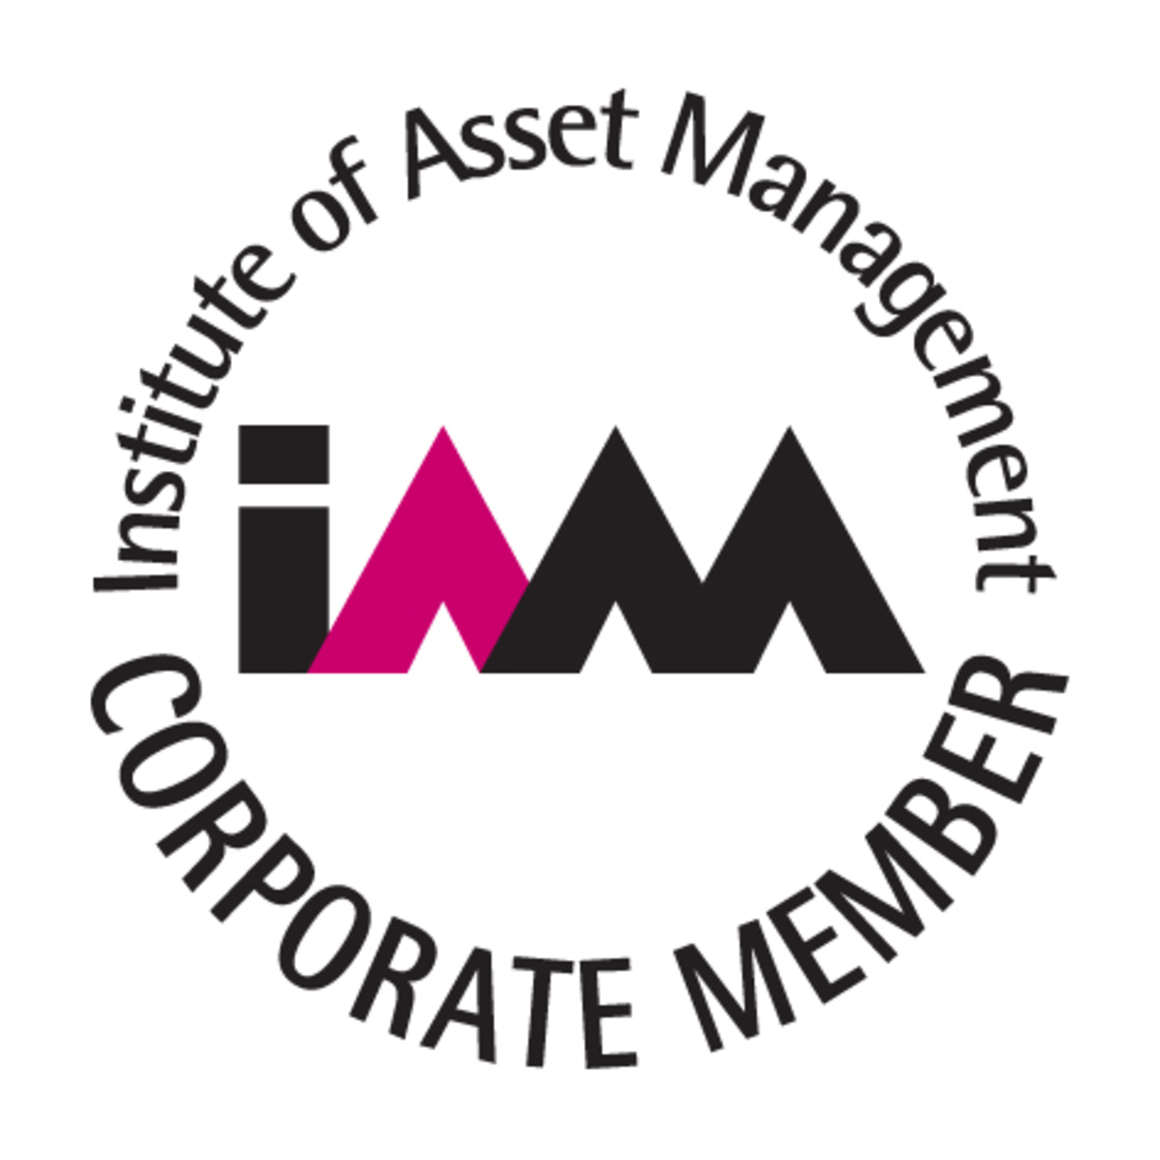 UReason is a Corporate Member of the Institute of Asset Management